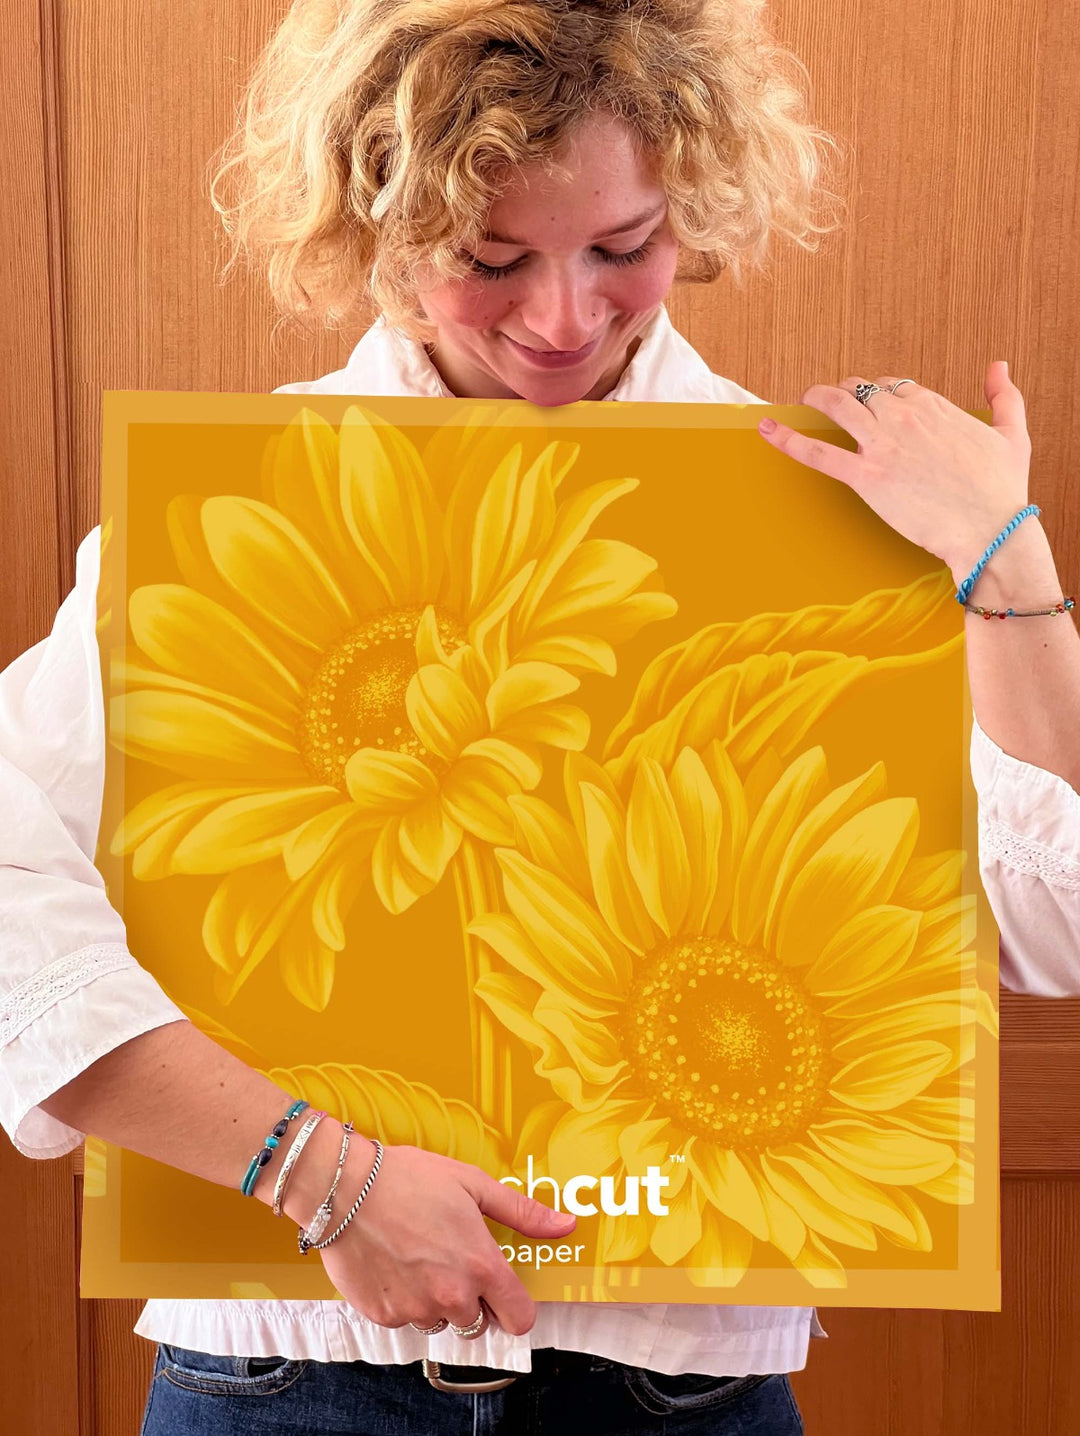 FreshCut Paper's Sunflower Grand comes with an exciting GRAND sunflower goldenvelope! This is sure to please any recipient. Send someone you love, FreshCut Paper bouquets.